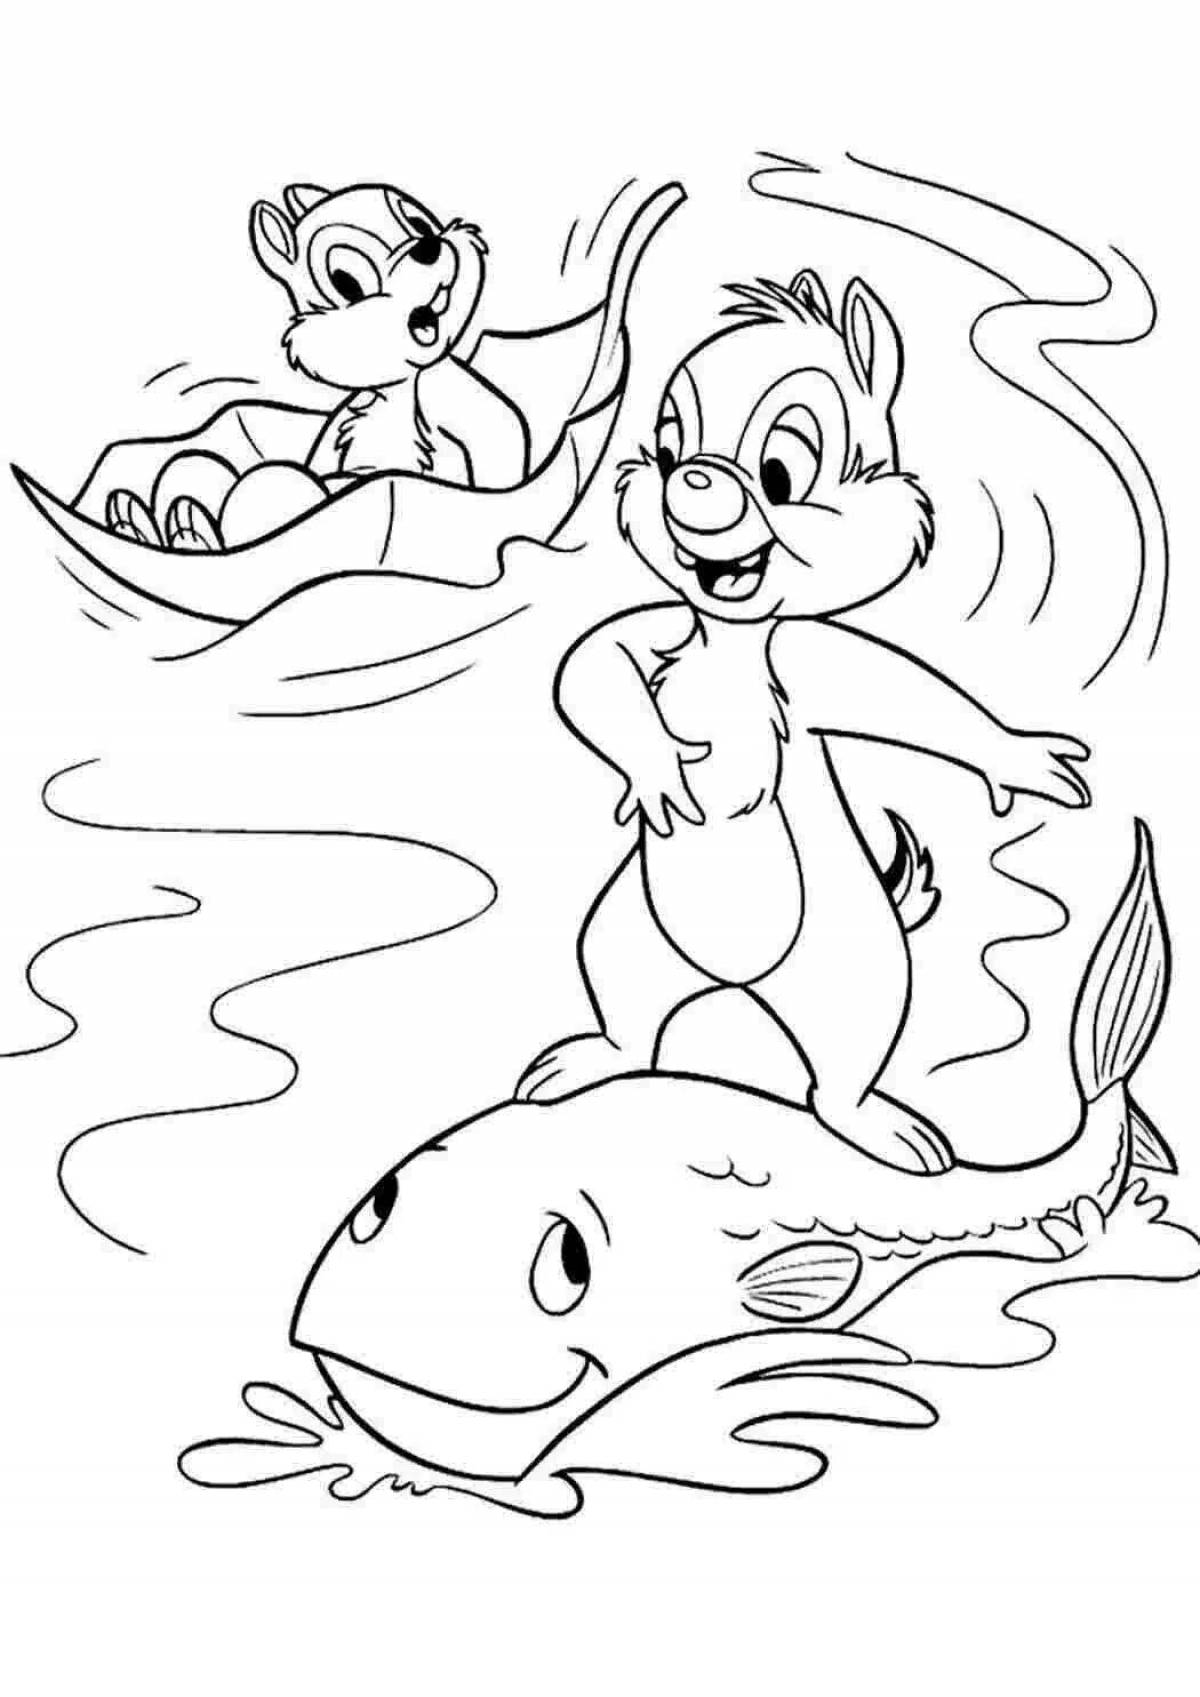 Playful dale coloring page